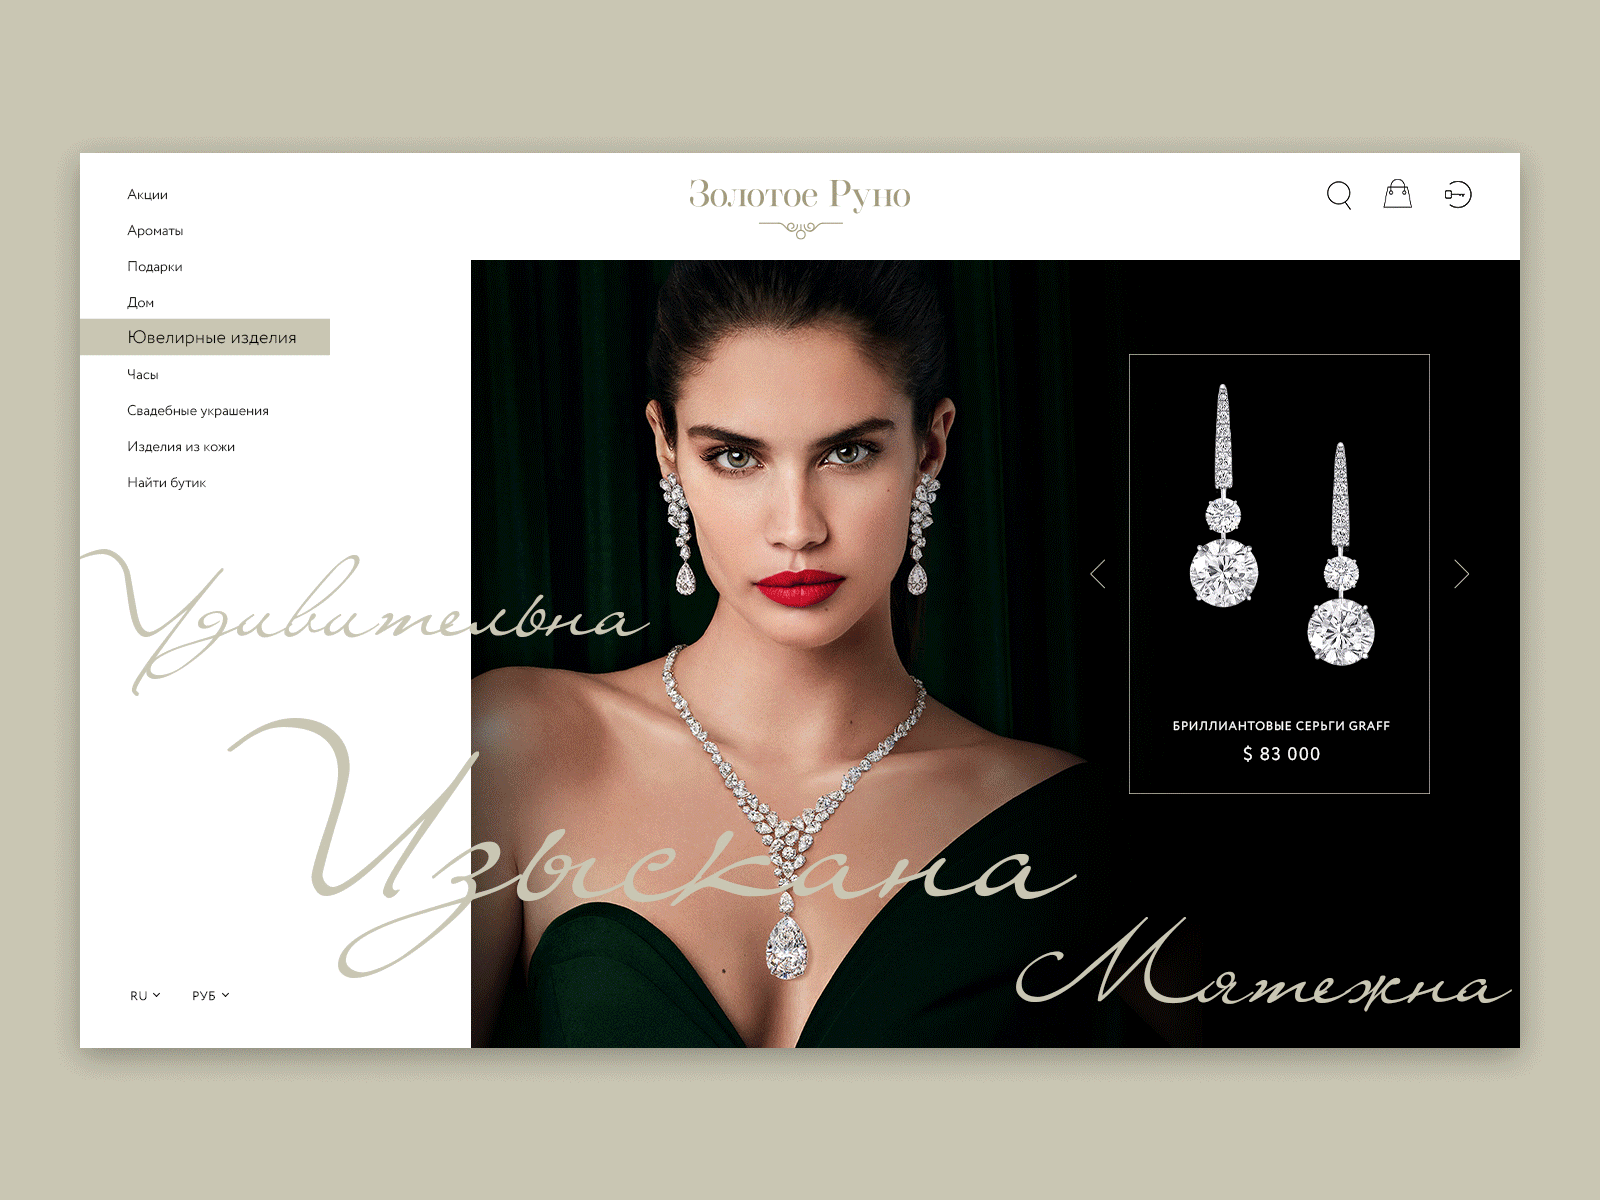 Design concept of website for jewelry multibrand fashion jewelry landing ui website